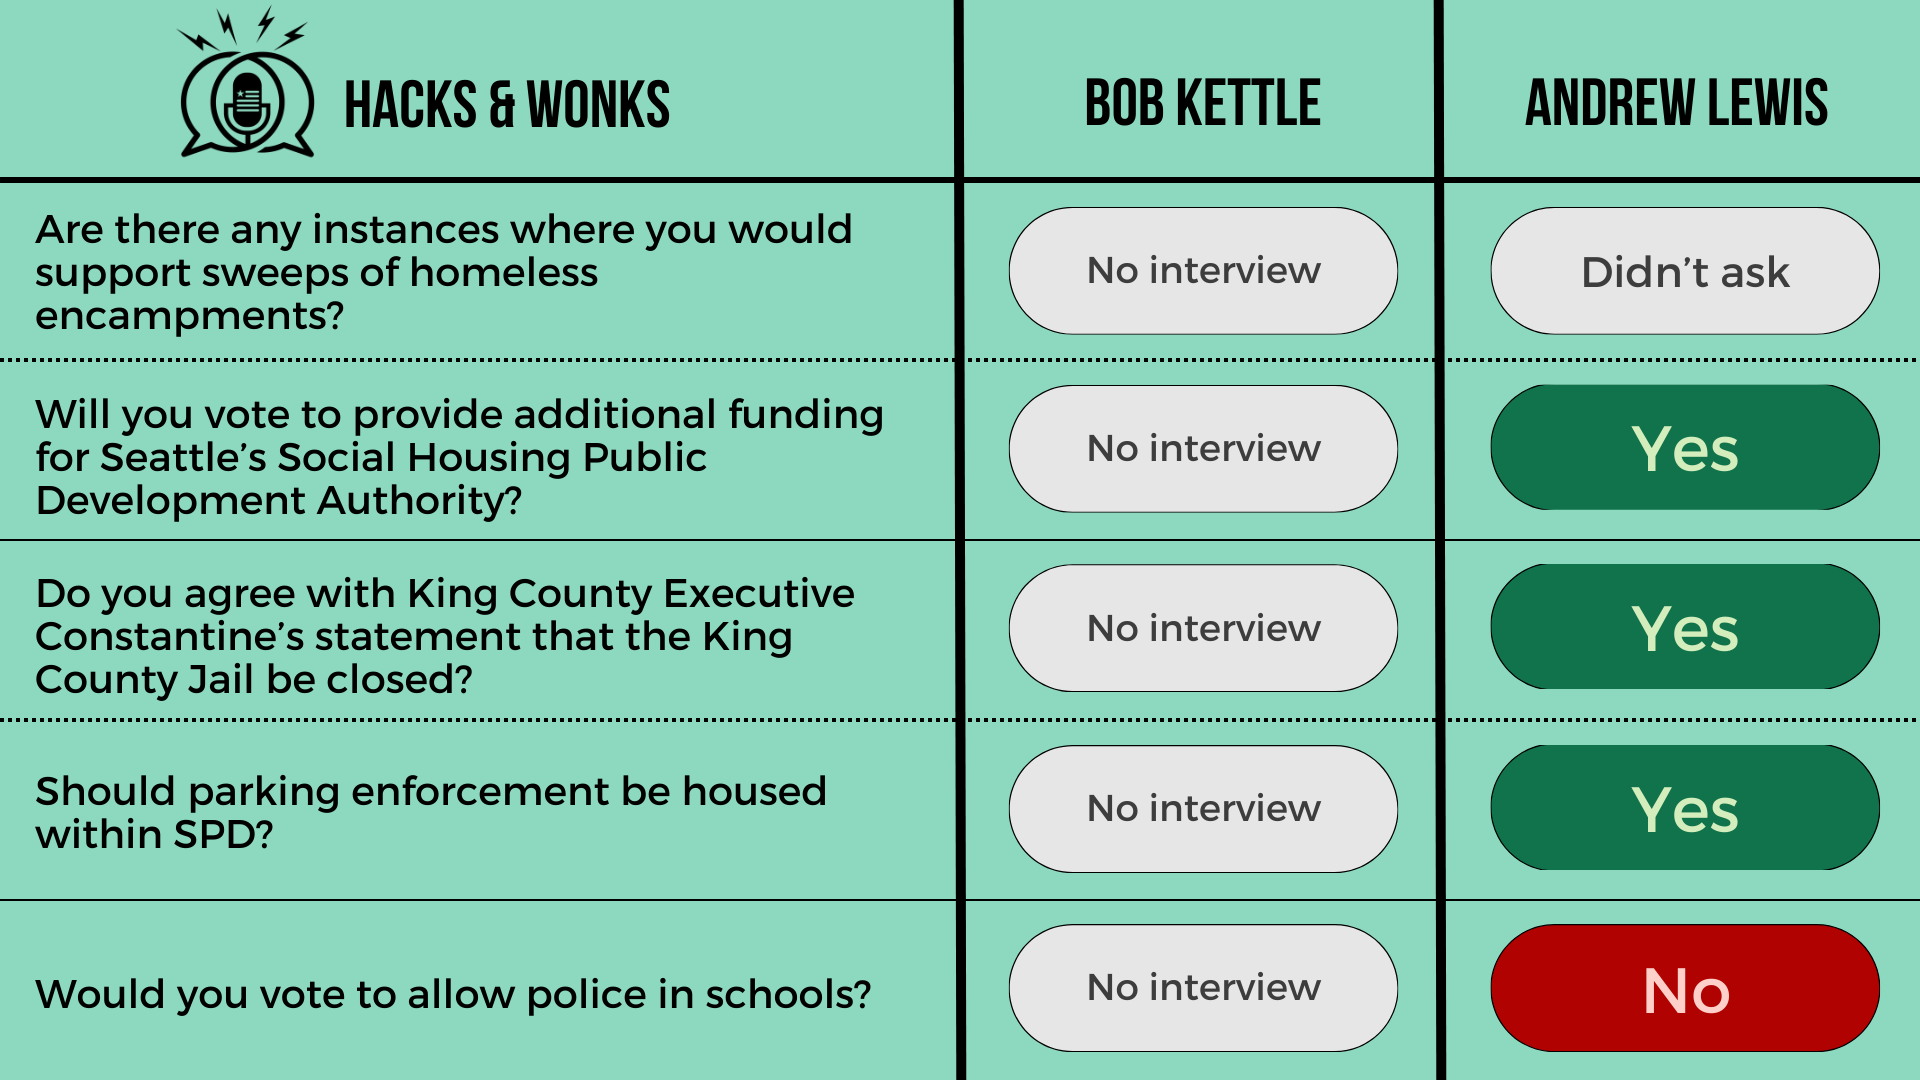 Q: Are there any instances where you would support sweeps of homeless encampments? Bob Kettle: No interview, Andrew Lewis: Didn’t ask  Q: Will you vote to provide additional funding for Seattle’s Social Housing Public Development Authority? Bob Kettl